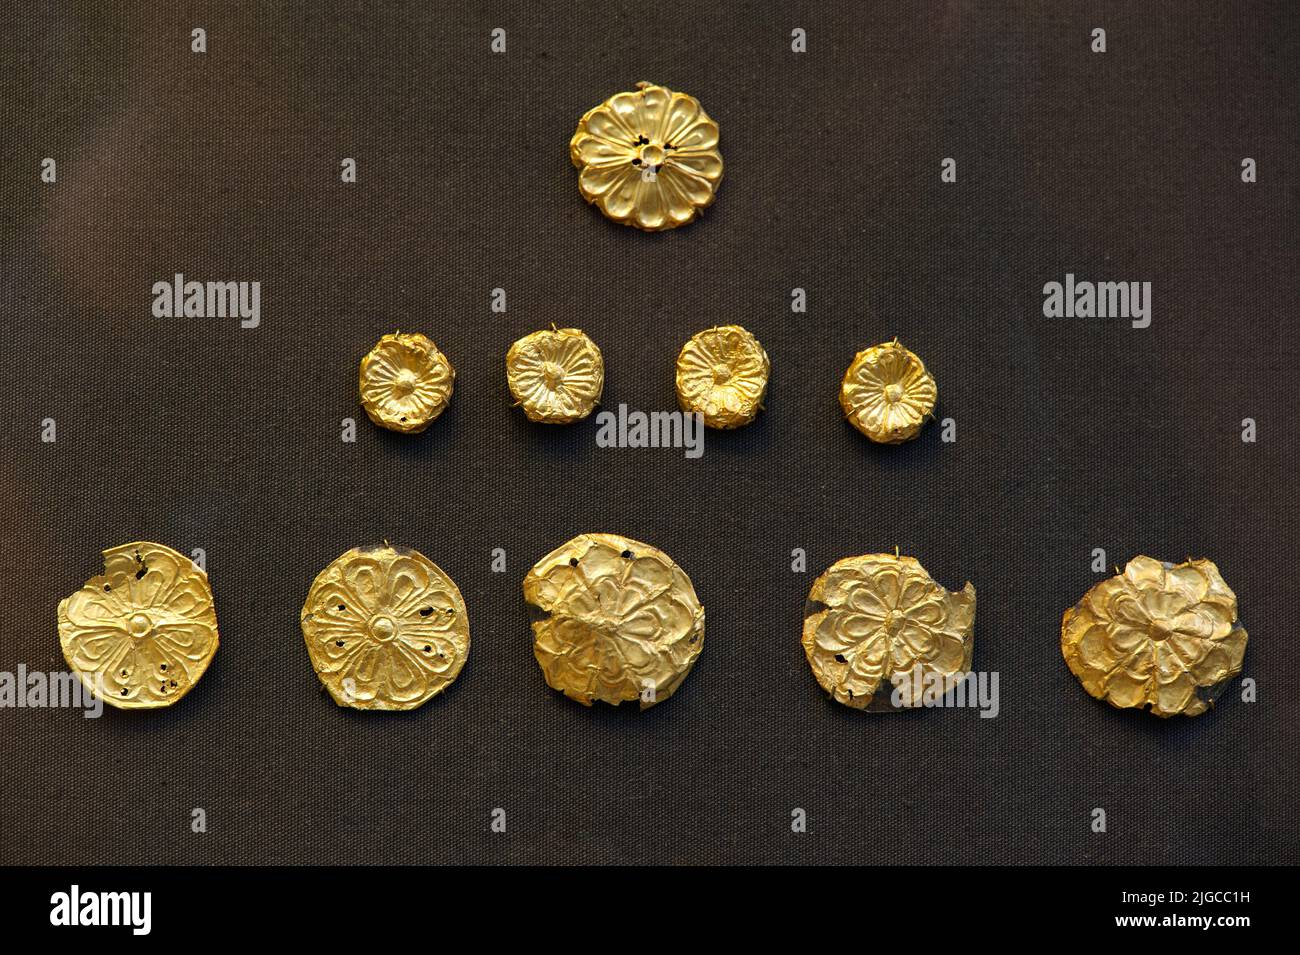 Old gold coins at the British Museum Stock Photo